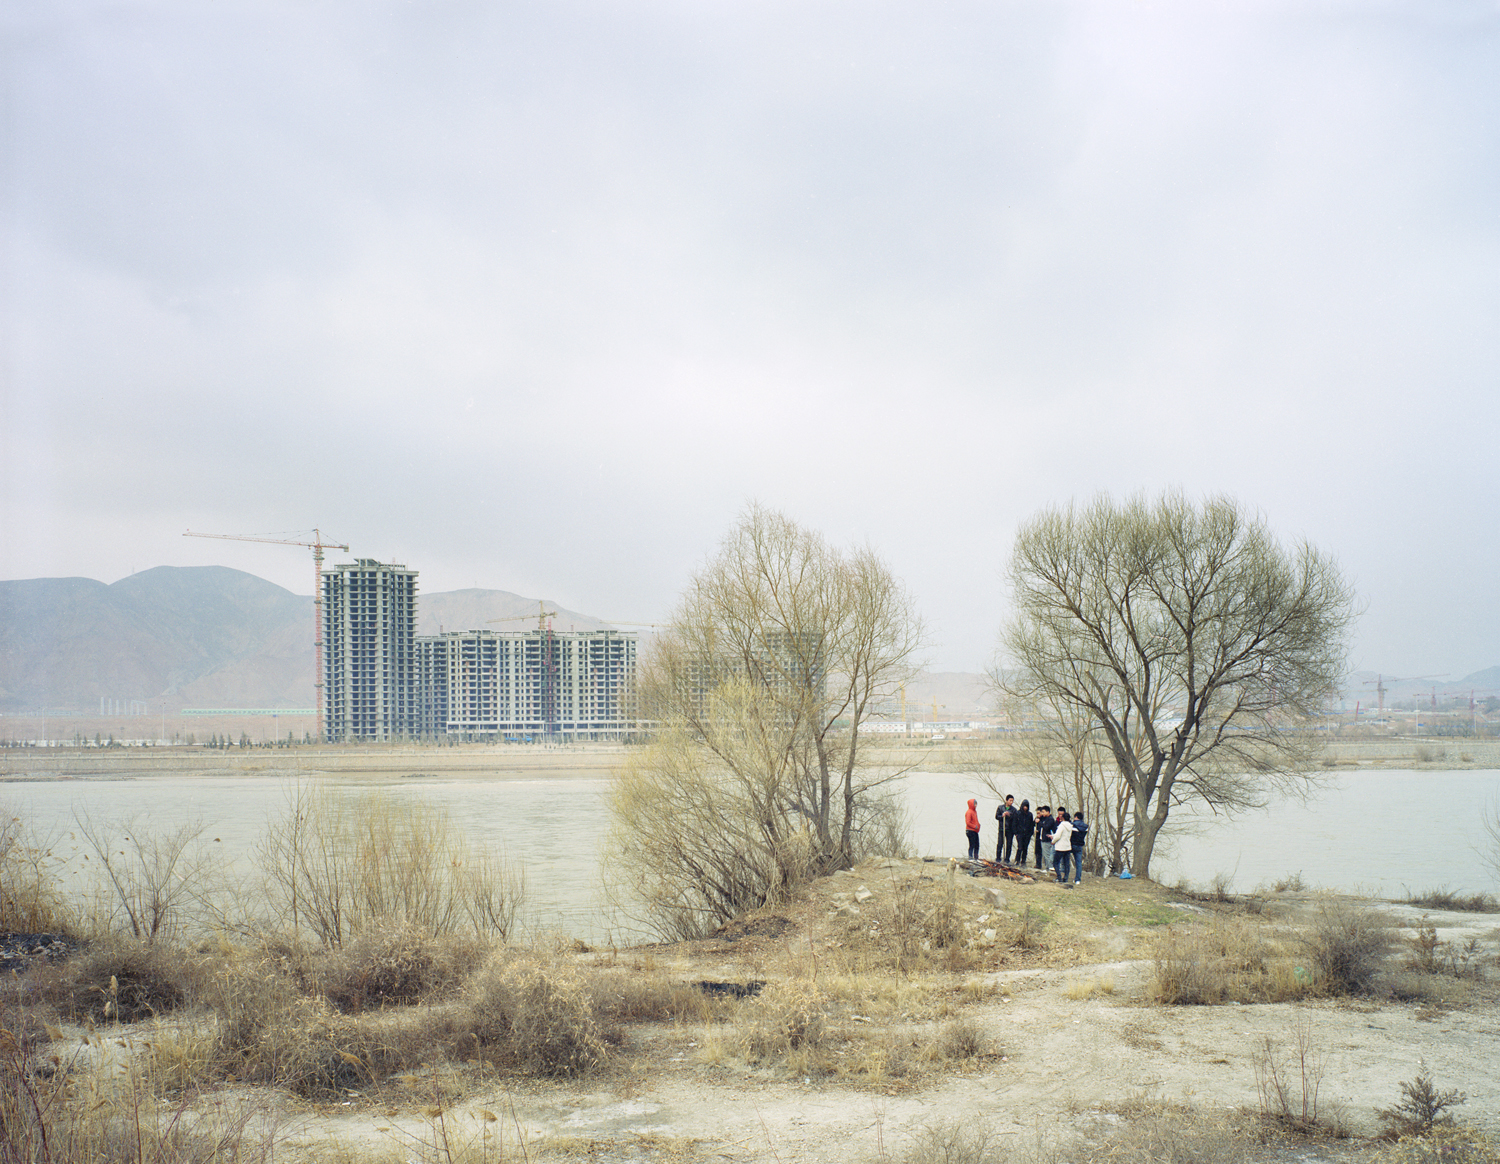 image: Young people gathered around a fire by the river, Gansu province.